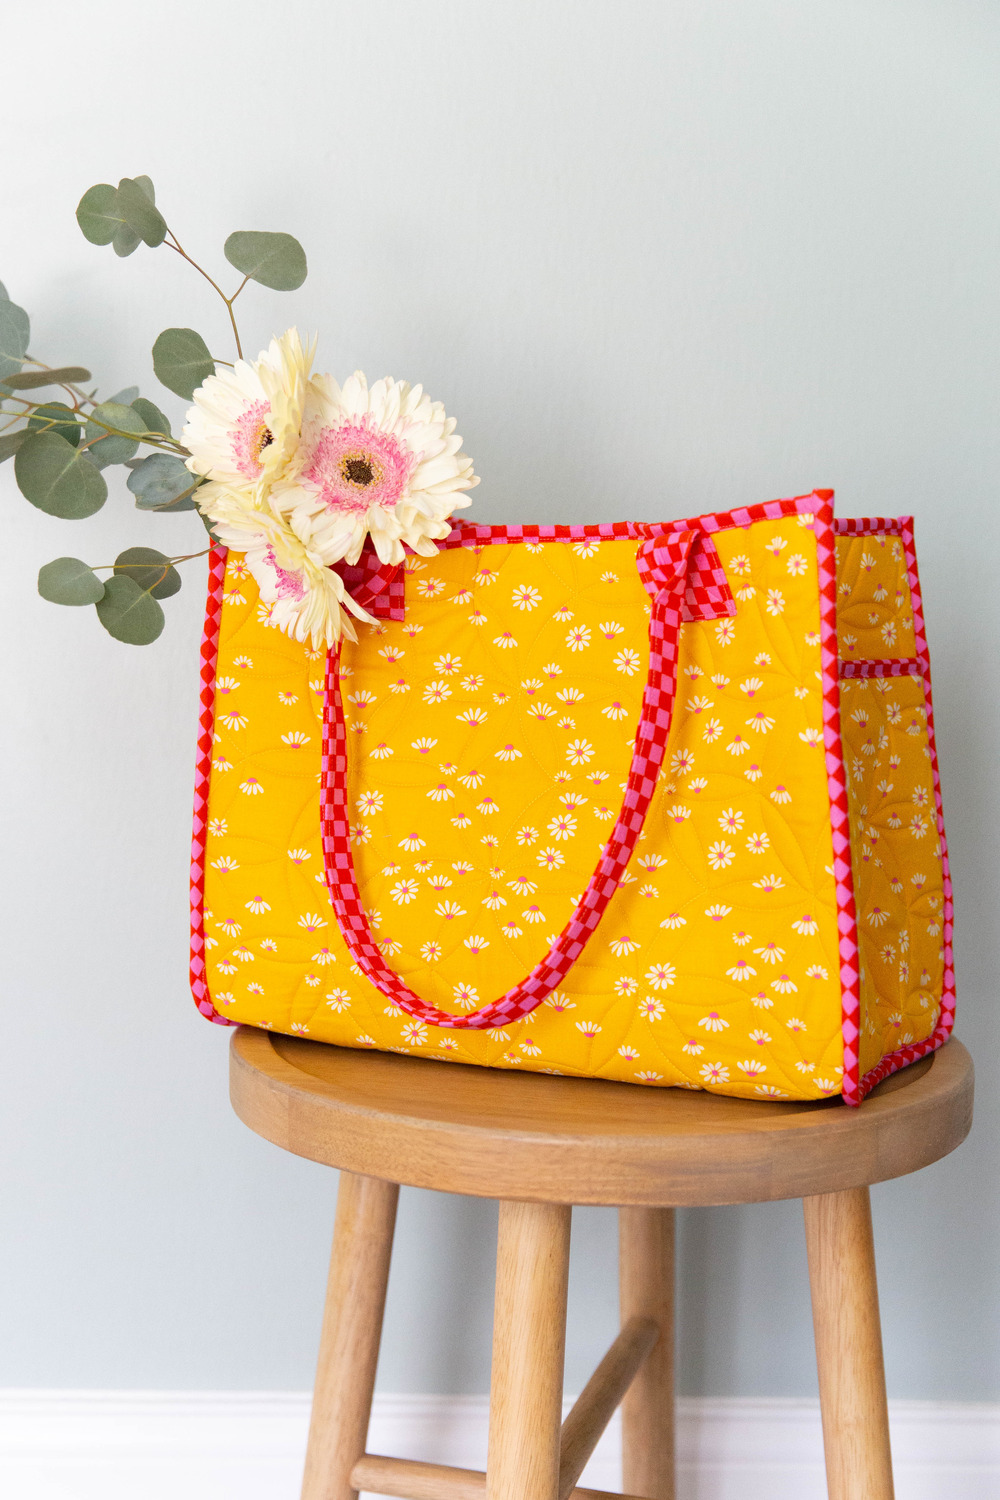 The All the Things Tote from Knot and Thread Design